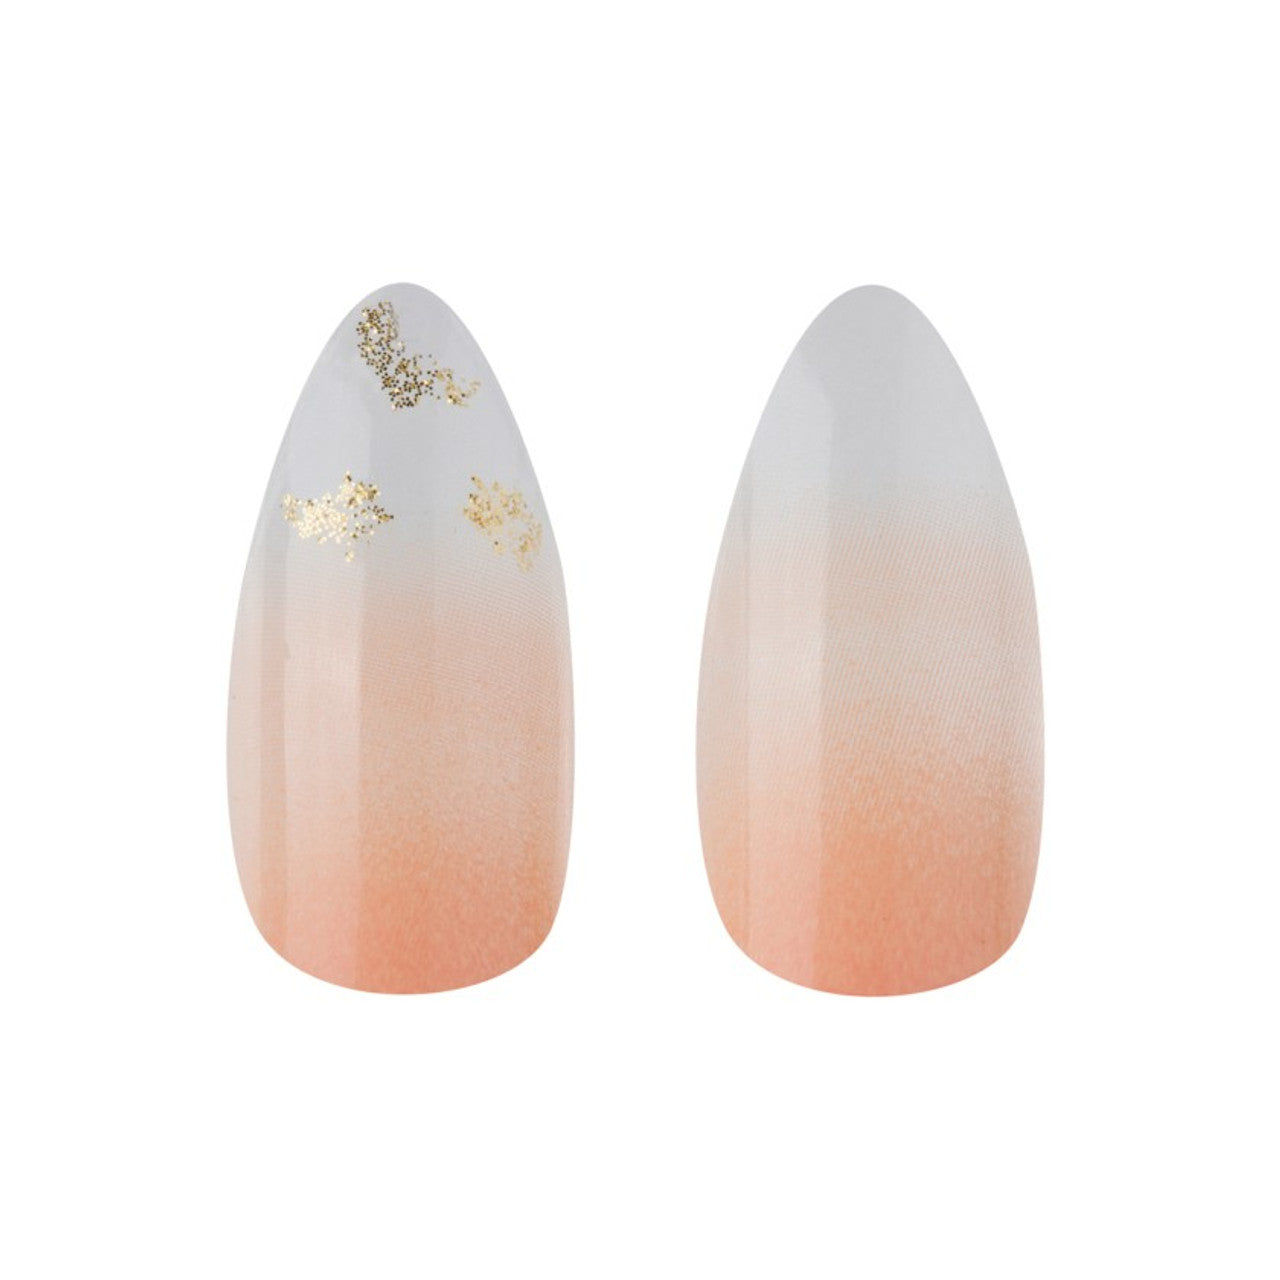 Cala - Nail Creations Lux Stiletto Clear Tip Press On Nails